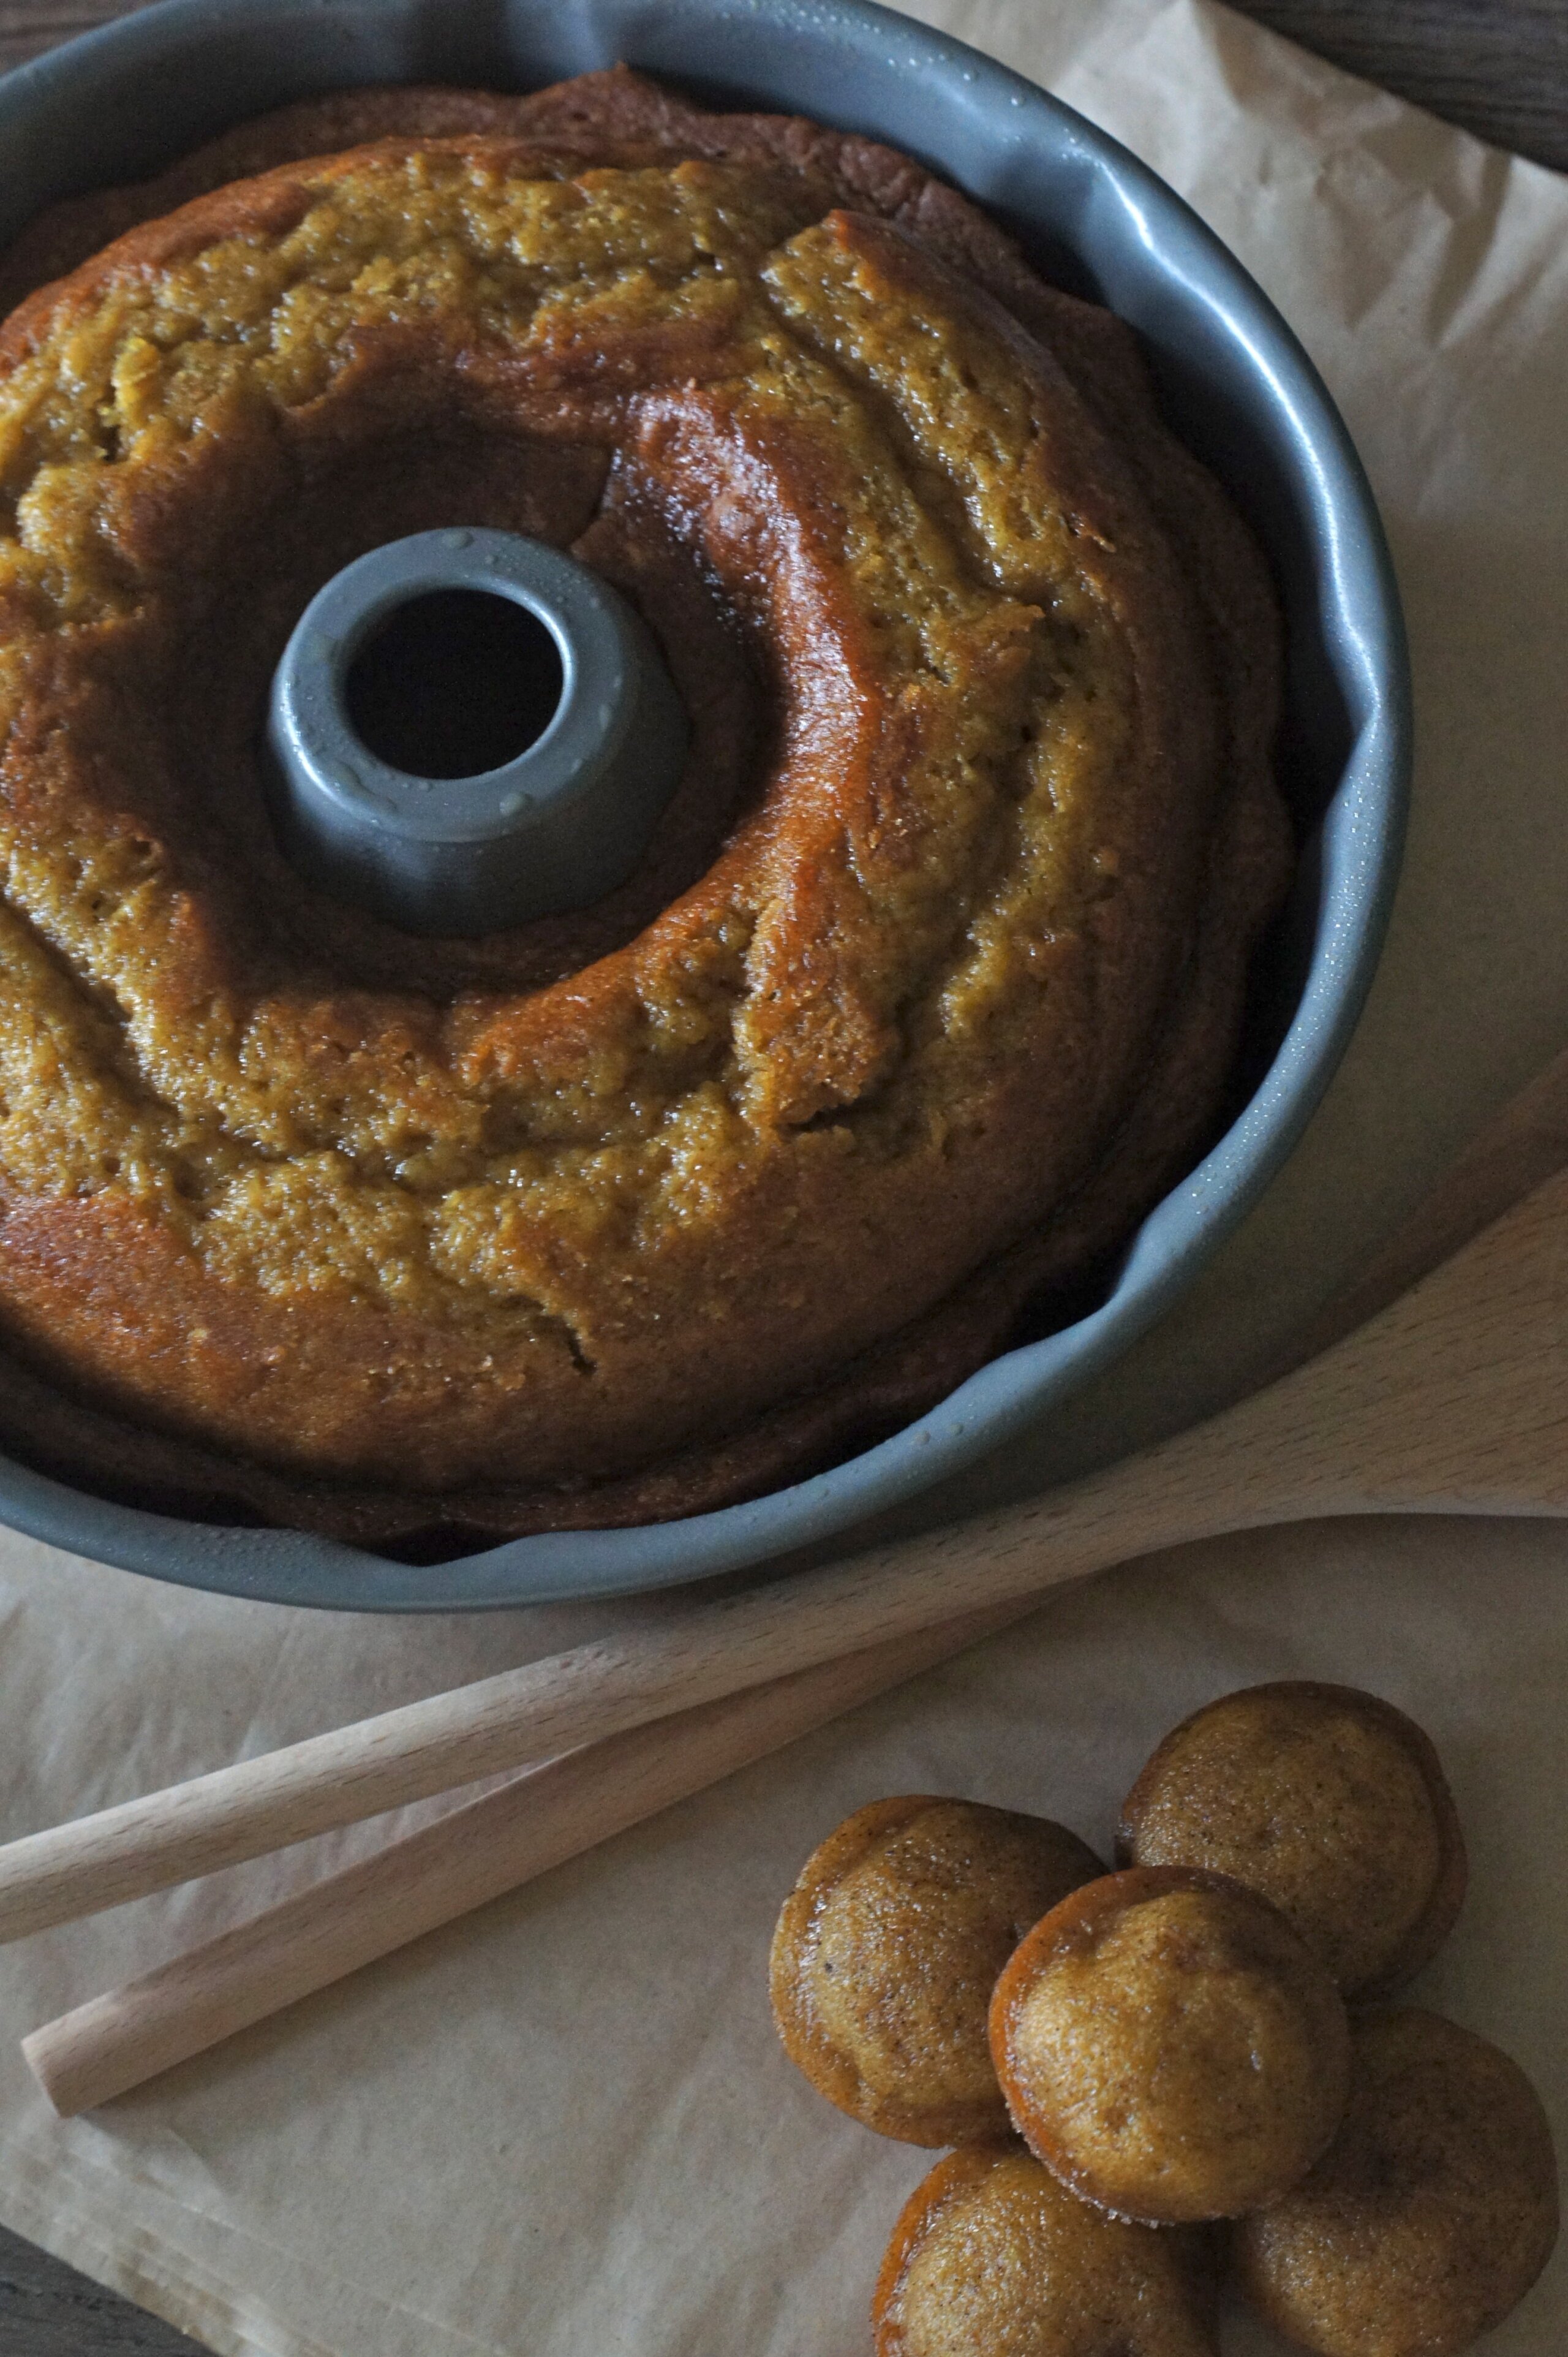 A freshly baked pumpkin ginger bundt cake in the bundt pan, with mini muffins beside it